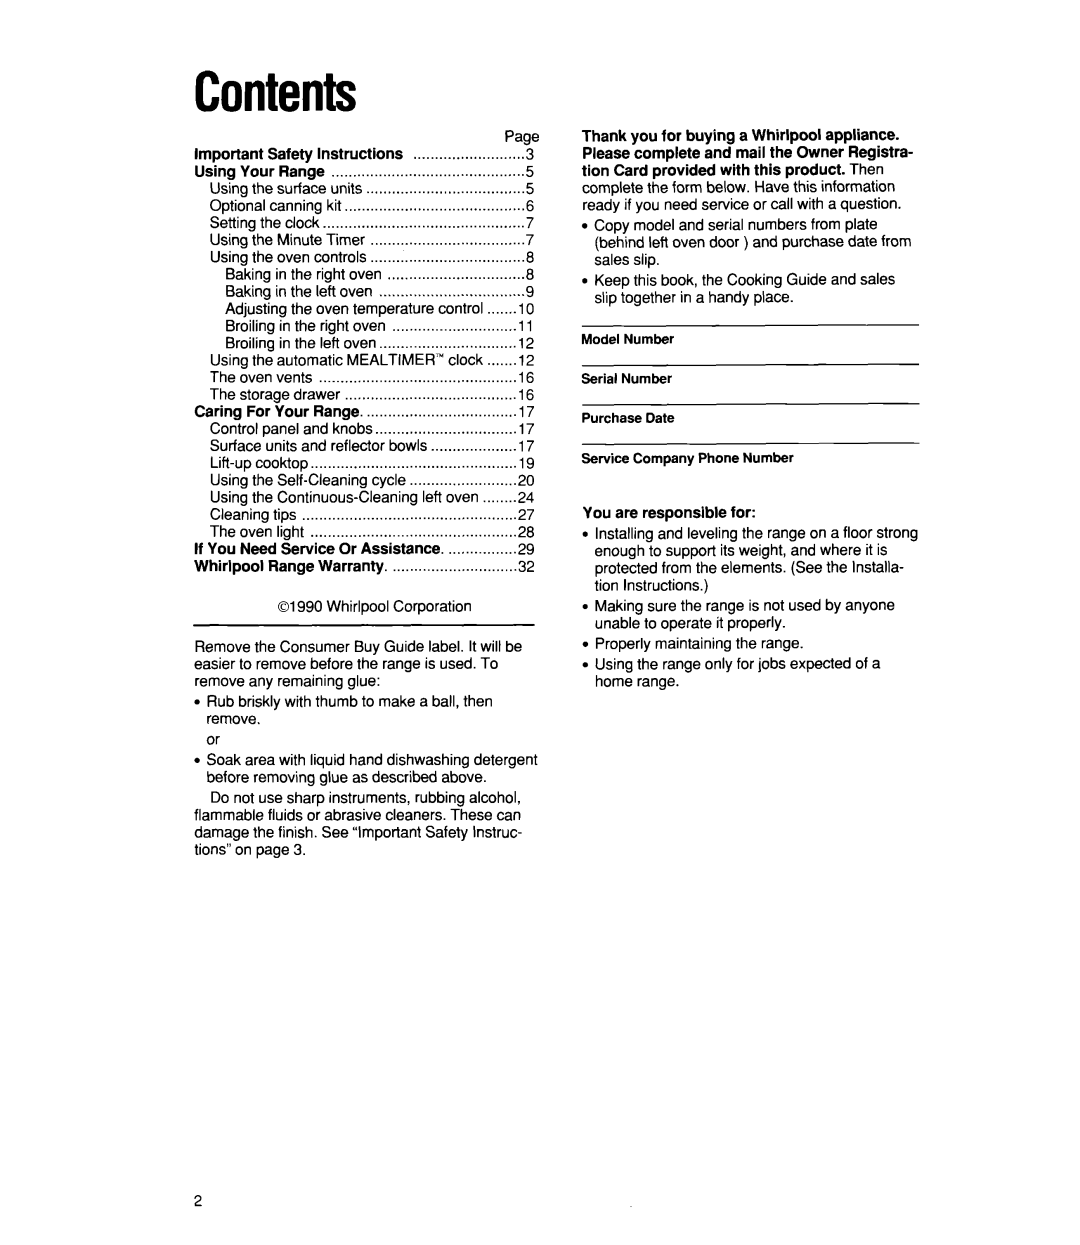 Whirlpool RF4700XW manual Contents, You are responsible for 